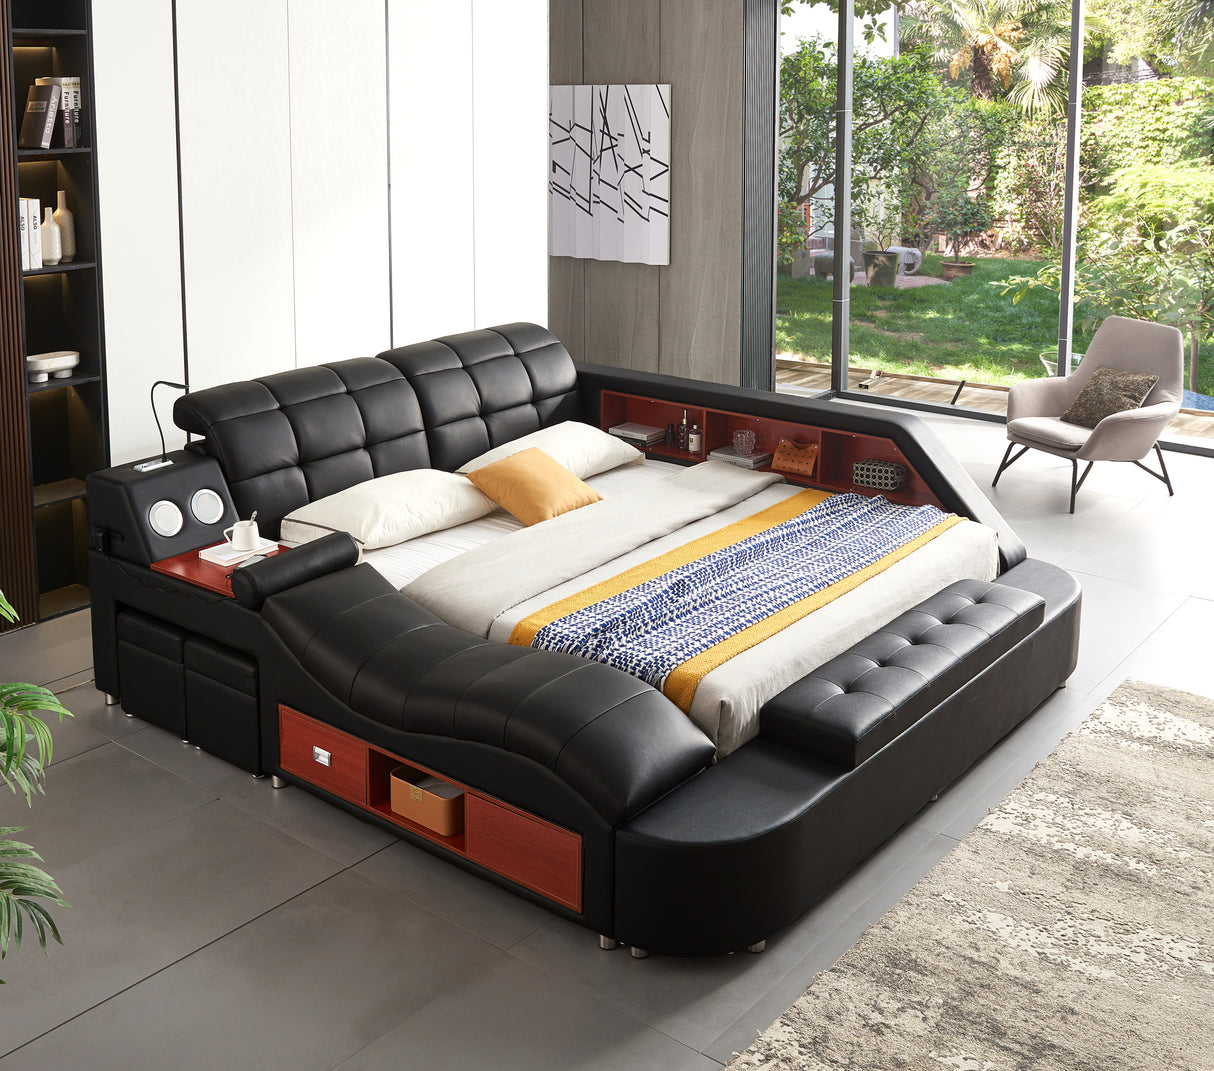 Multifunctional Upholstered Storage Bed Frame, Massage Chaise Lounge on Left, Queen Size, Black - Home Elegance USA